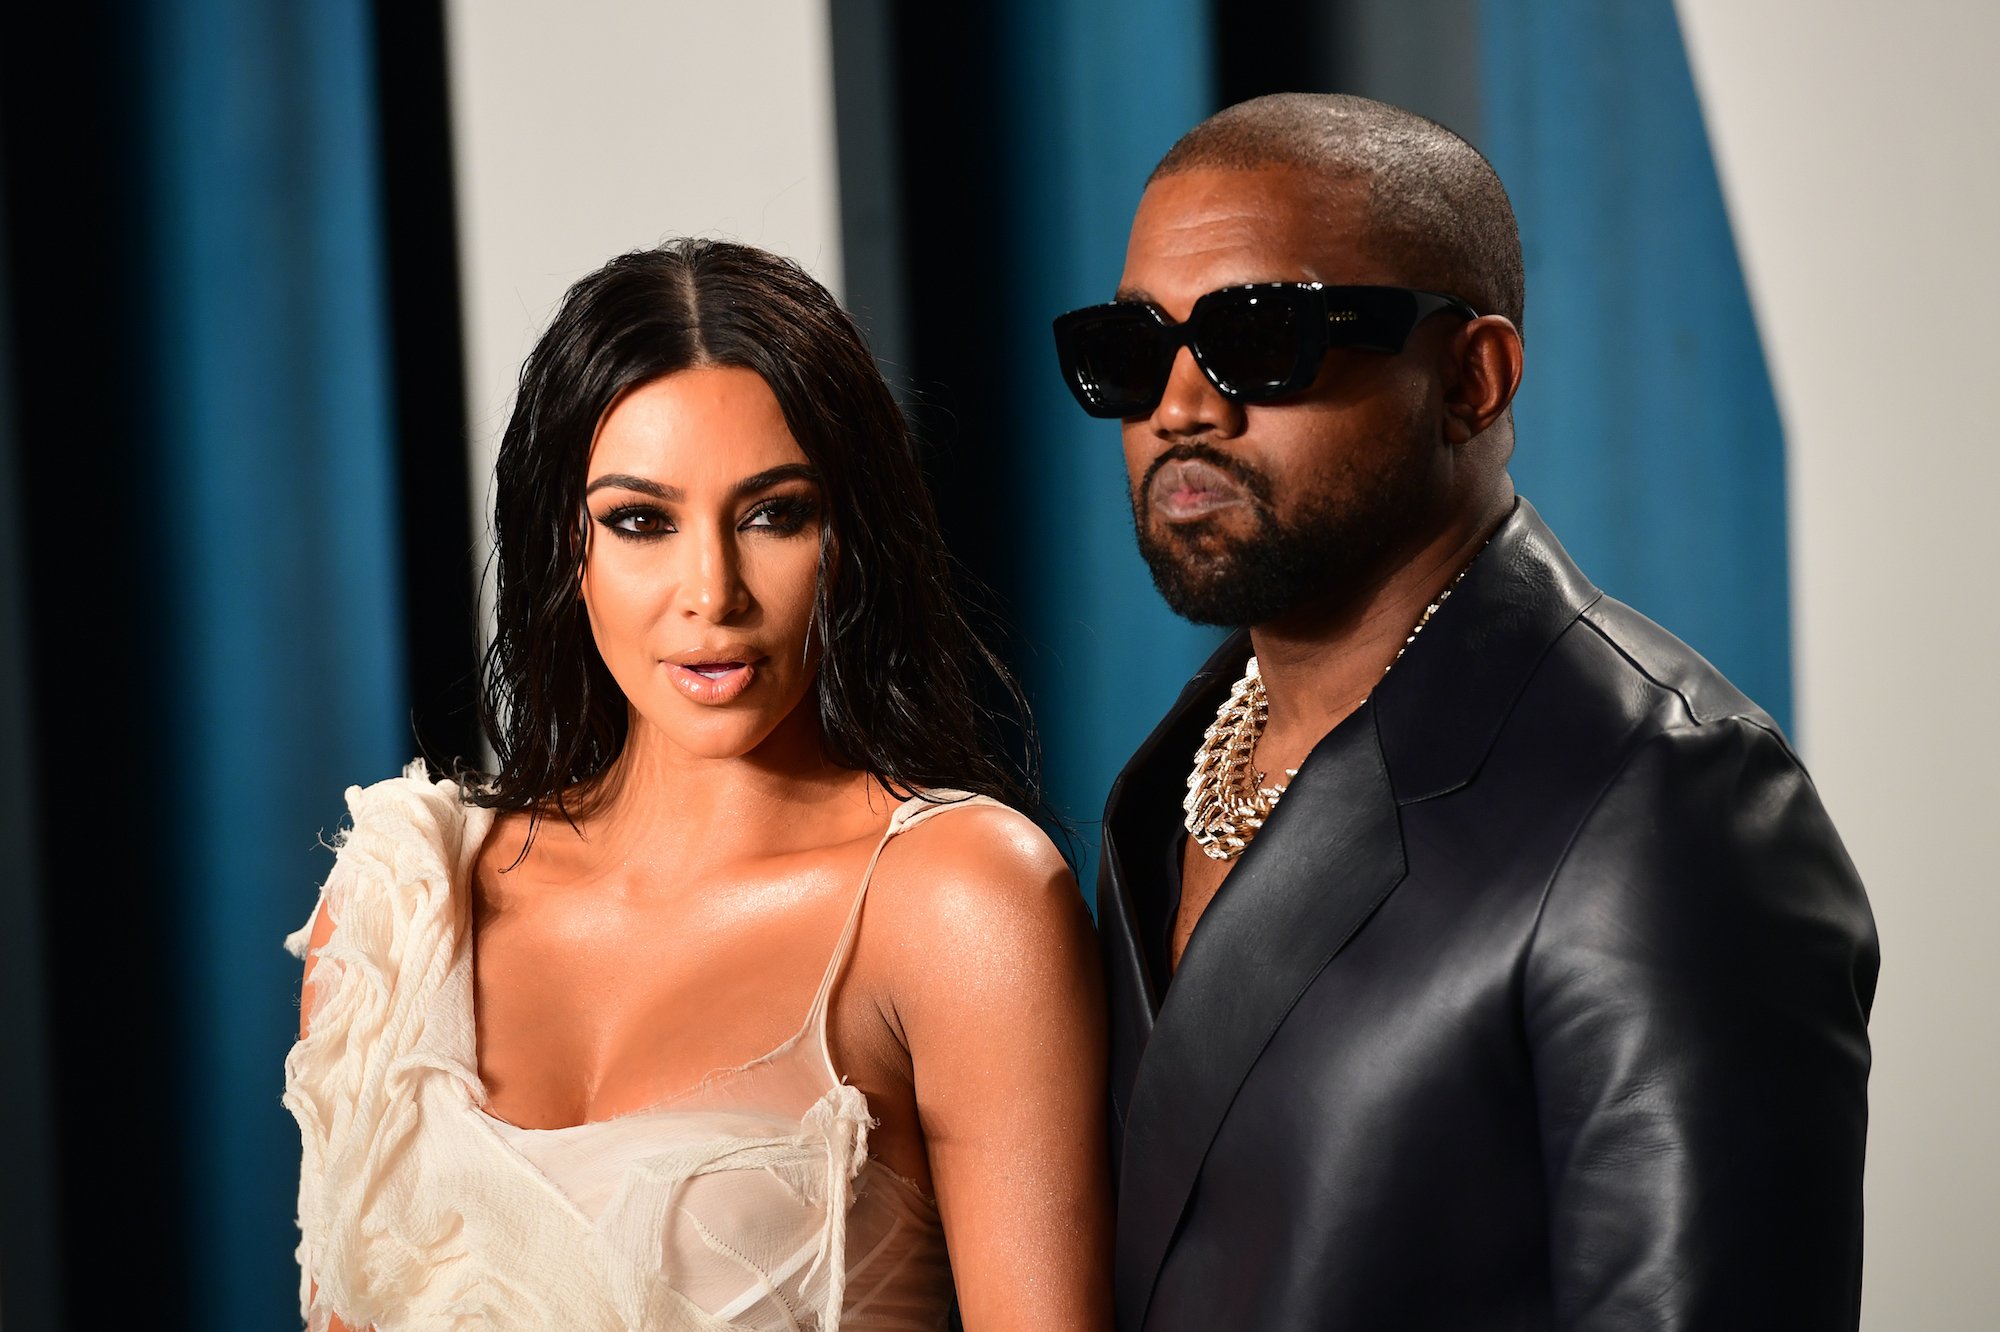 ‘KUWTK’: Some Fans Say They Respect Kim Kardashian for Not Wanting to Address the Kanye Situation